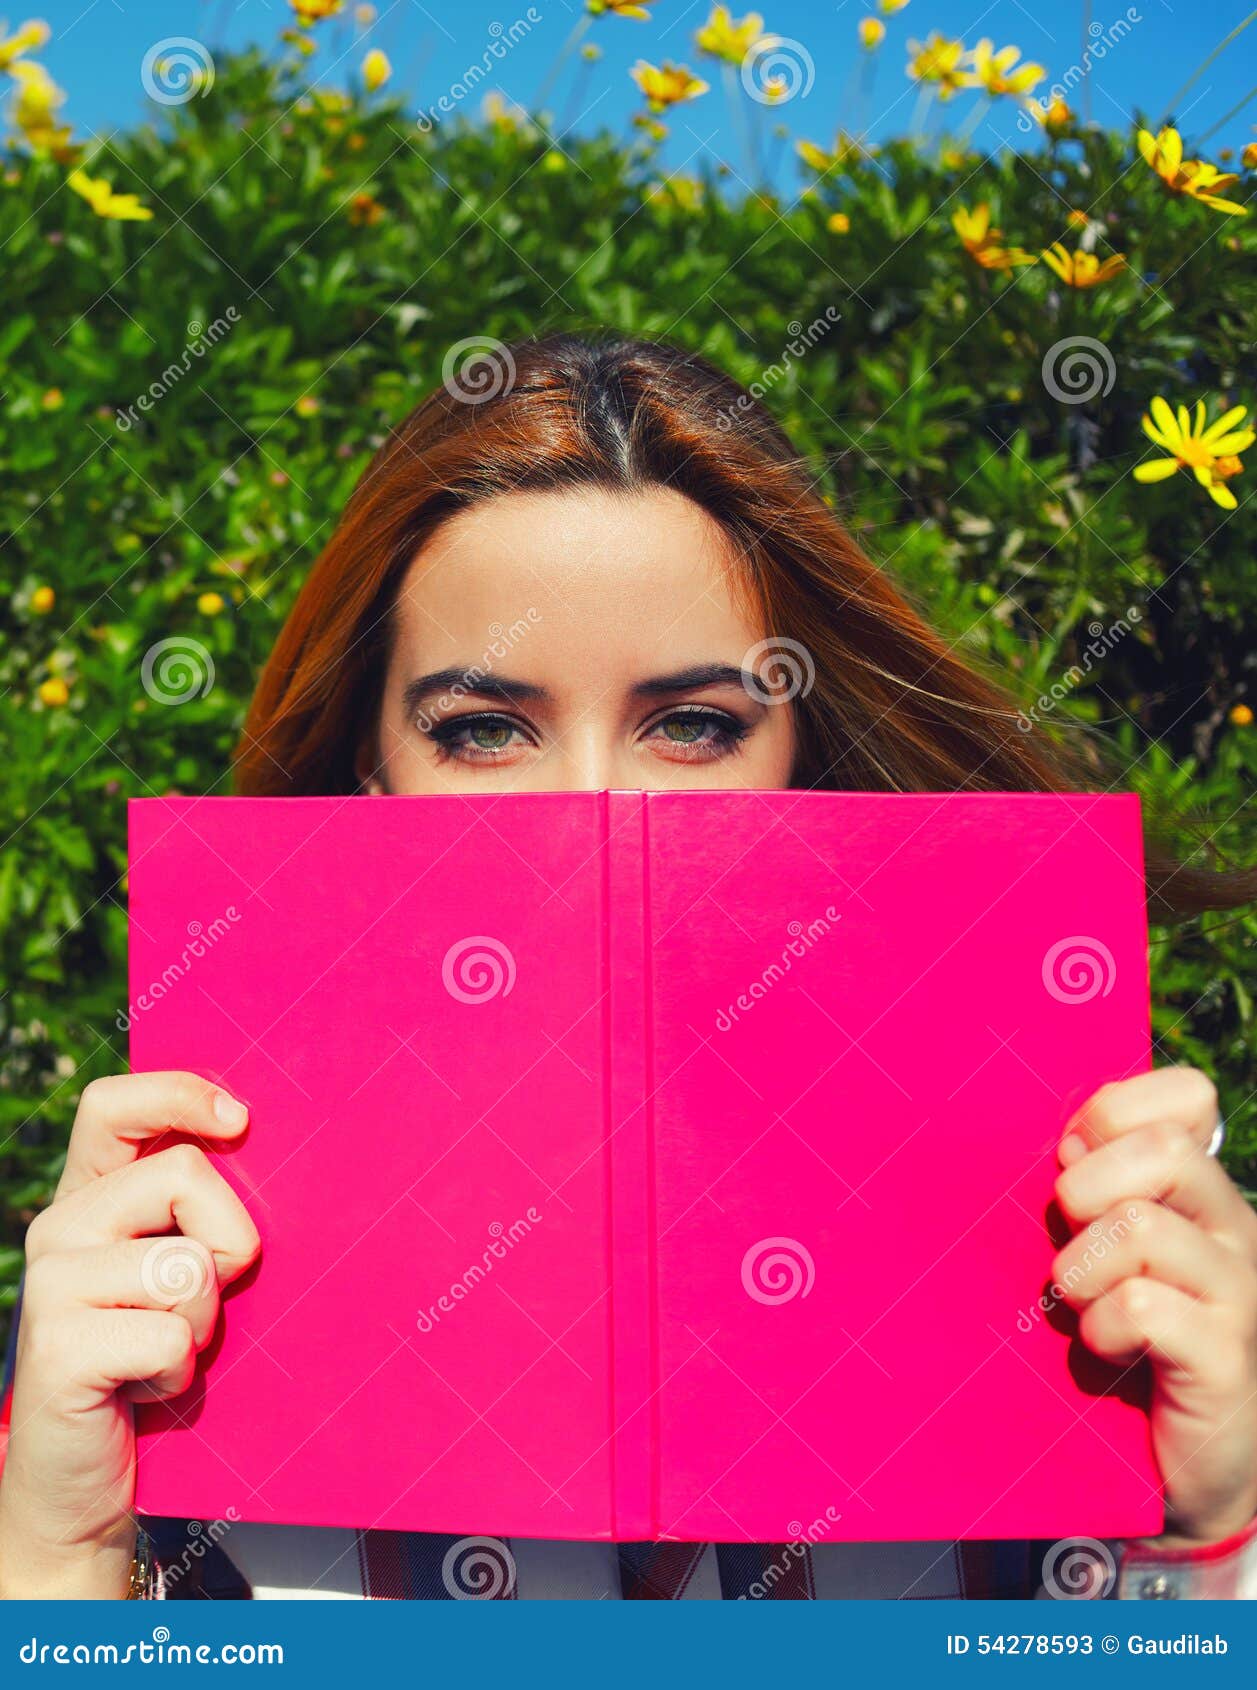 Сharming young woman with <b>pink book</b> held up close to her face - harming-young-woman-pink-book-held-up-close-to-her-face-portrait-charming-cute-female-covering-half-54278593